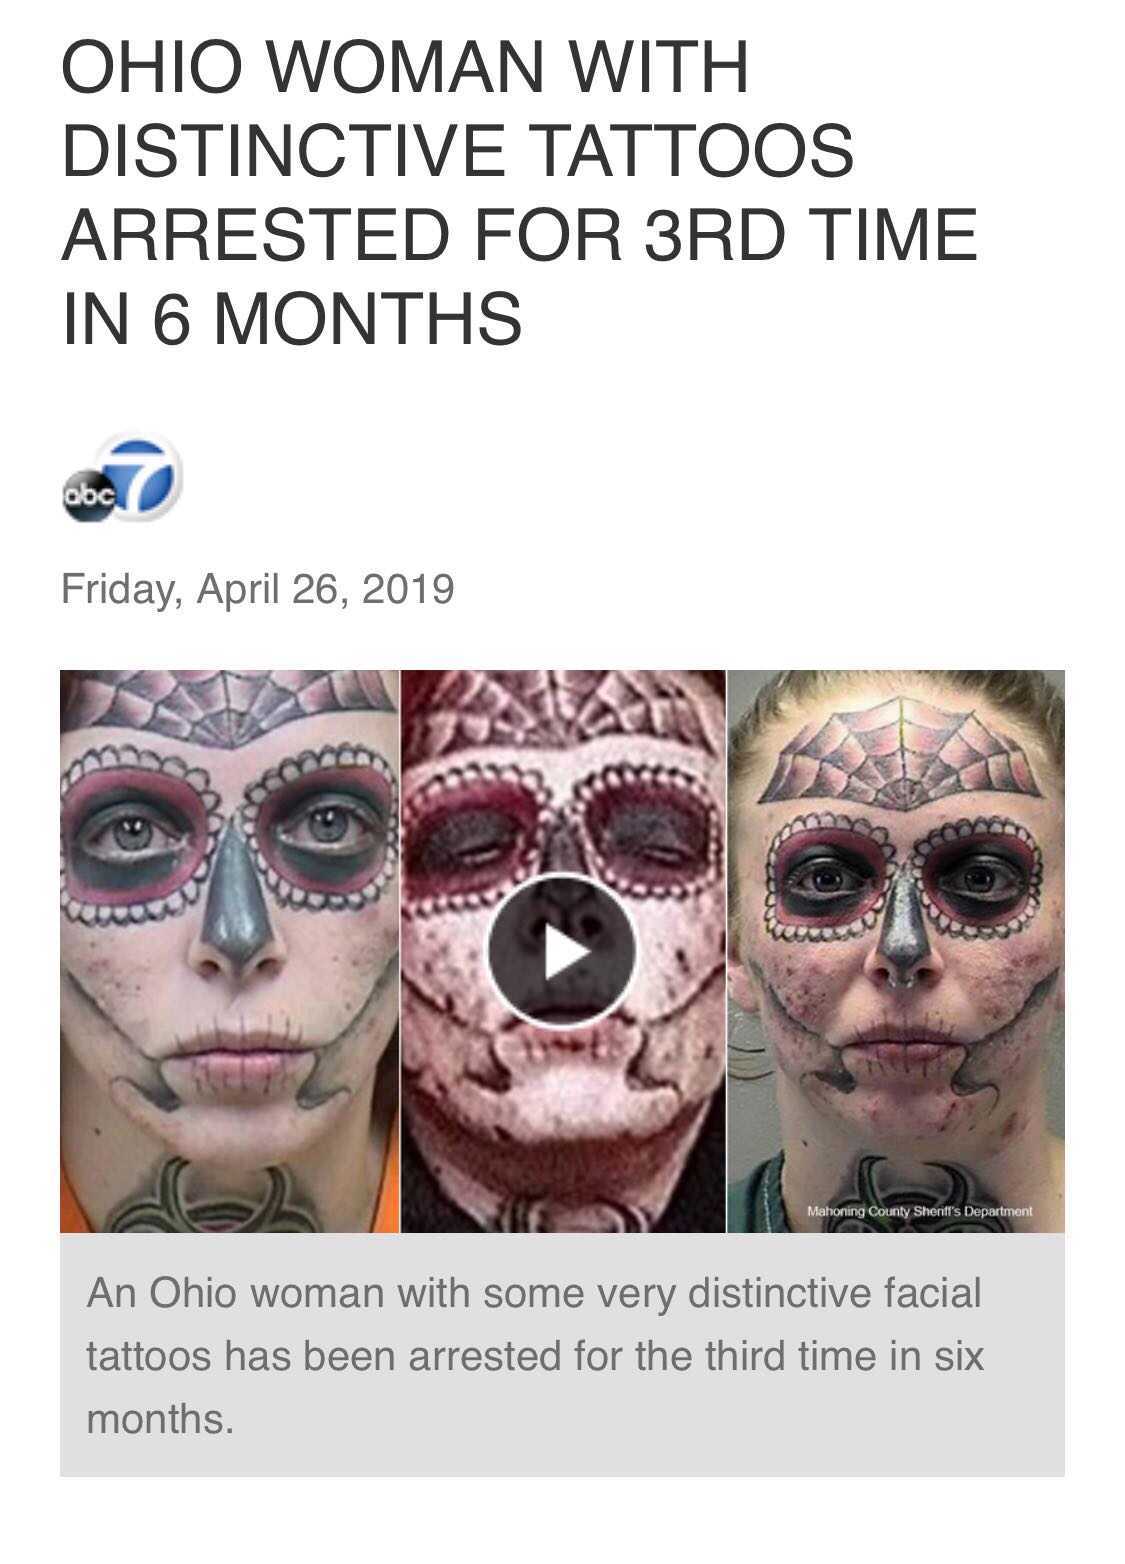 head - Ohio Woman With Distinctive Tattoos Arrested For 3RD Time In 6 Months abc Friday, Mahoning County Sherif's Department An Ohio woman with some very distinctive facial tattoos has been arrested for the third time in six months.